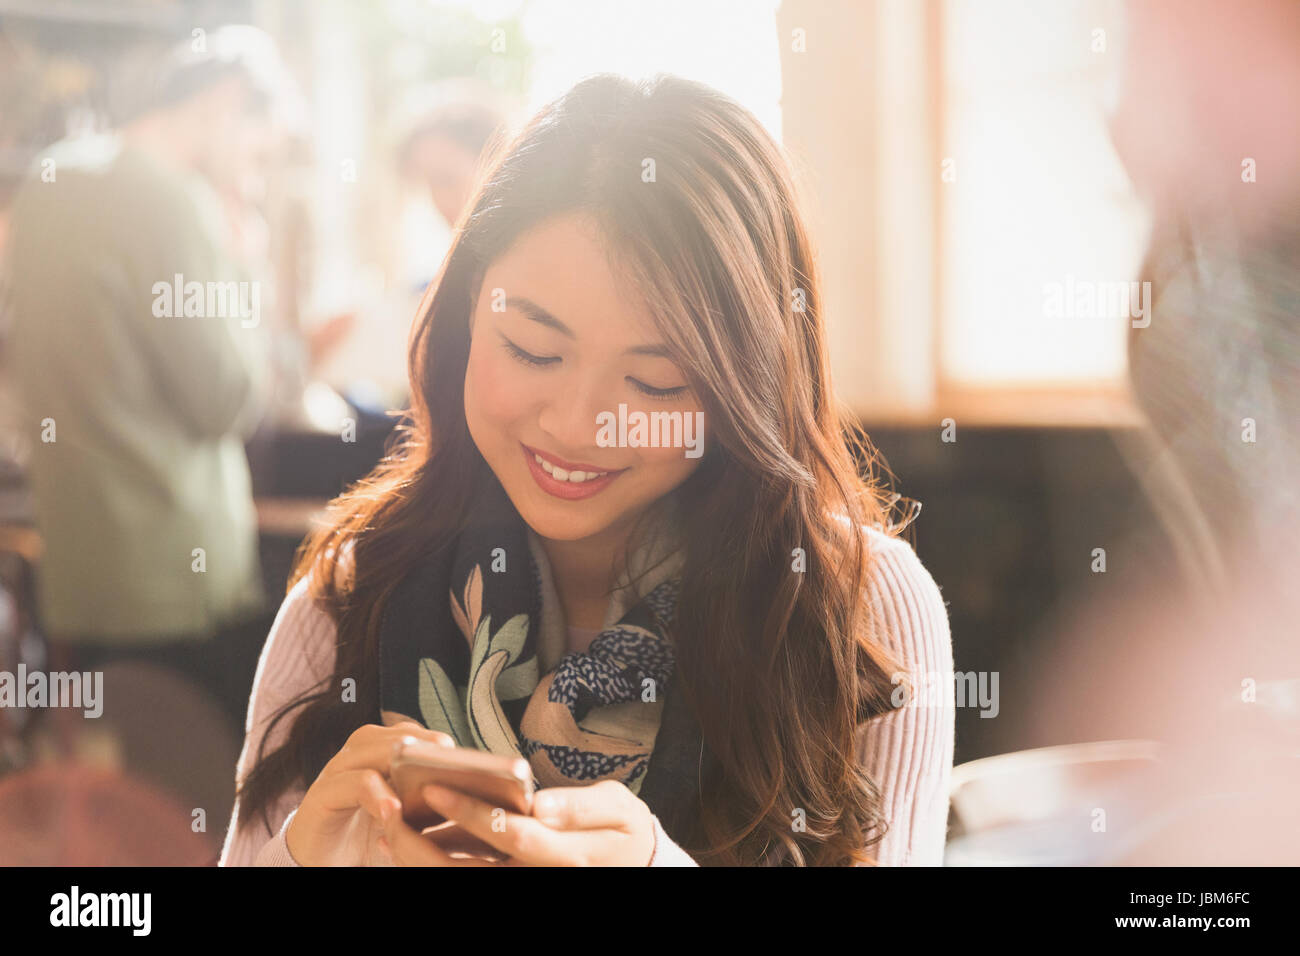 Smiling Chinese woman texting with cell phone in cafe Stock Photo